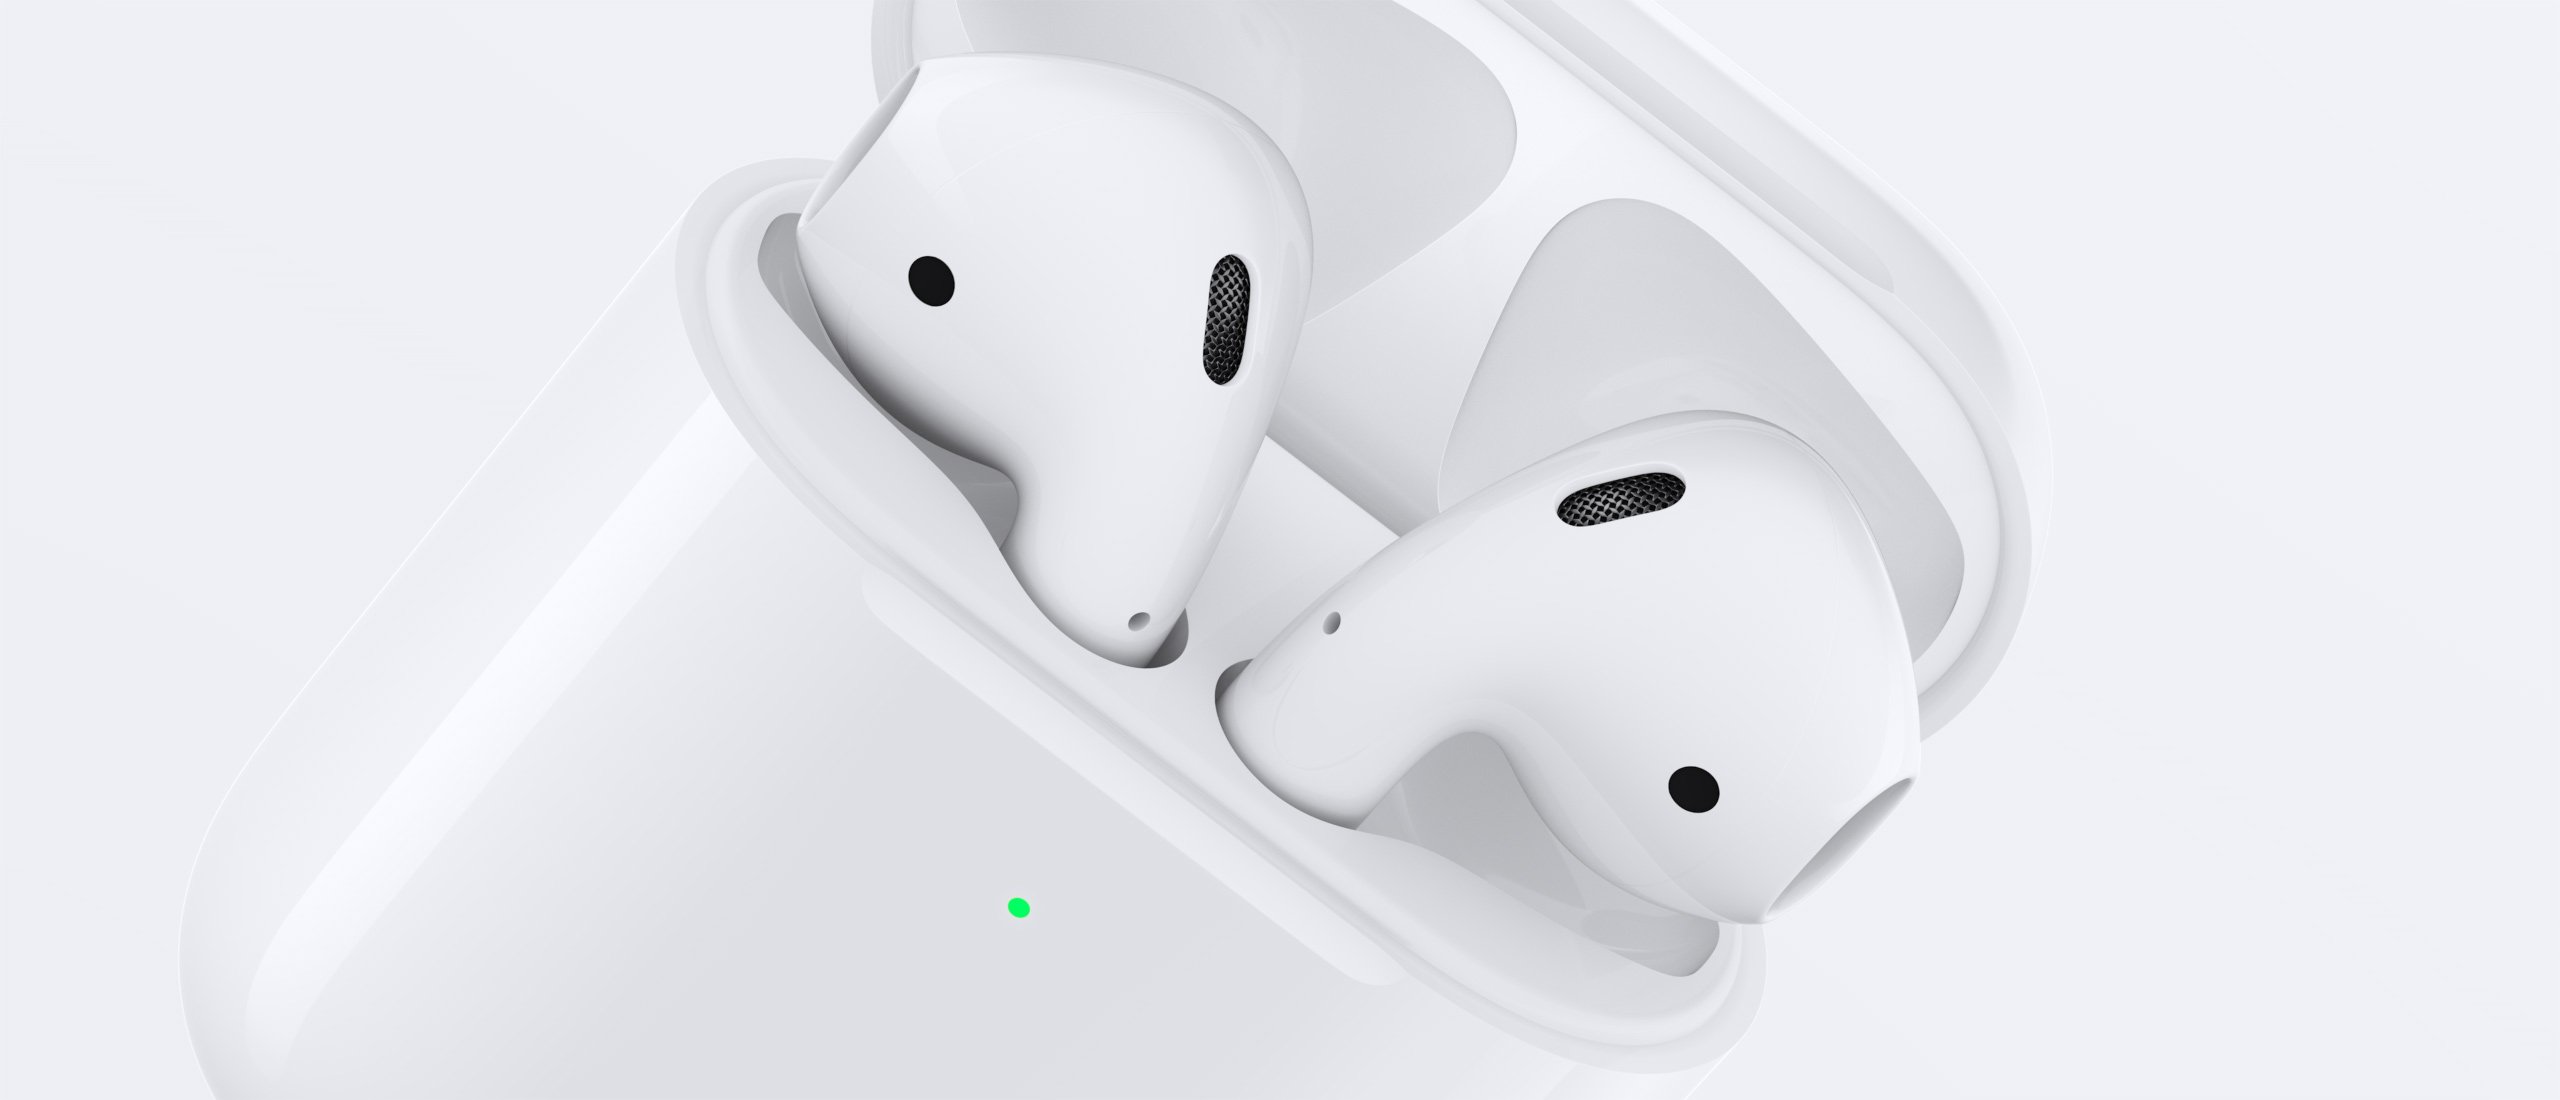 Airpods Apple 2019